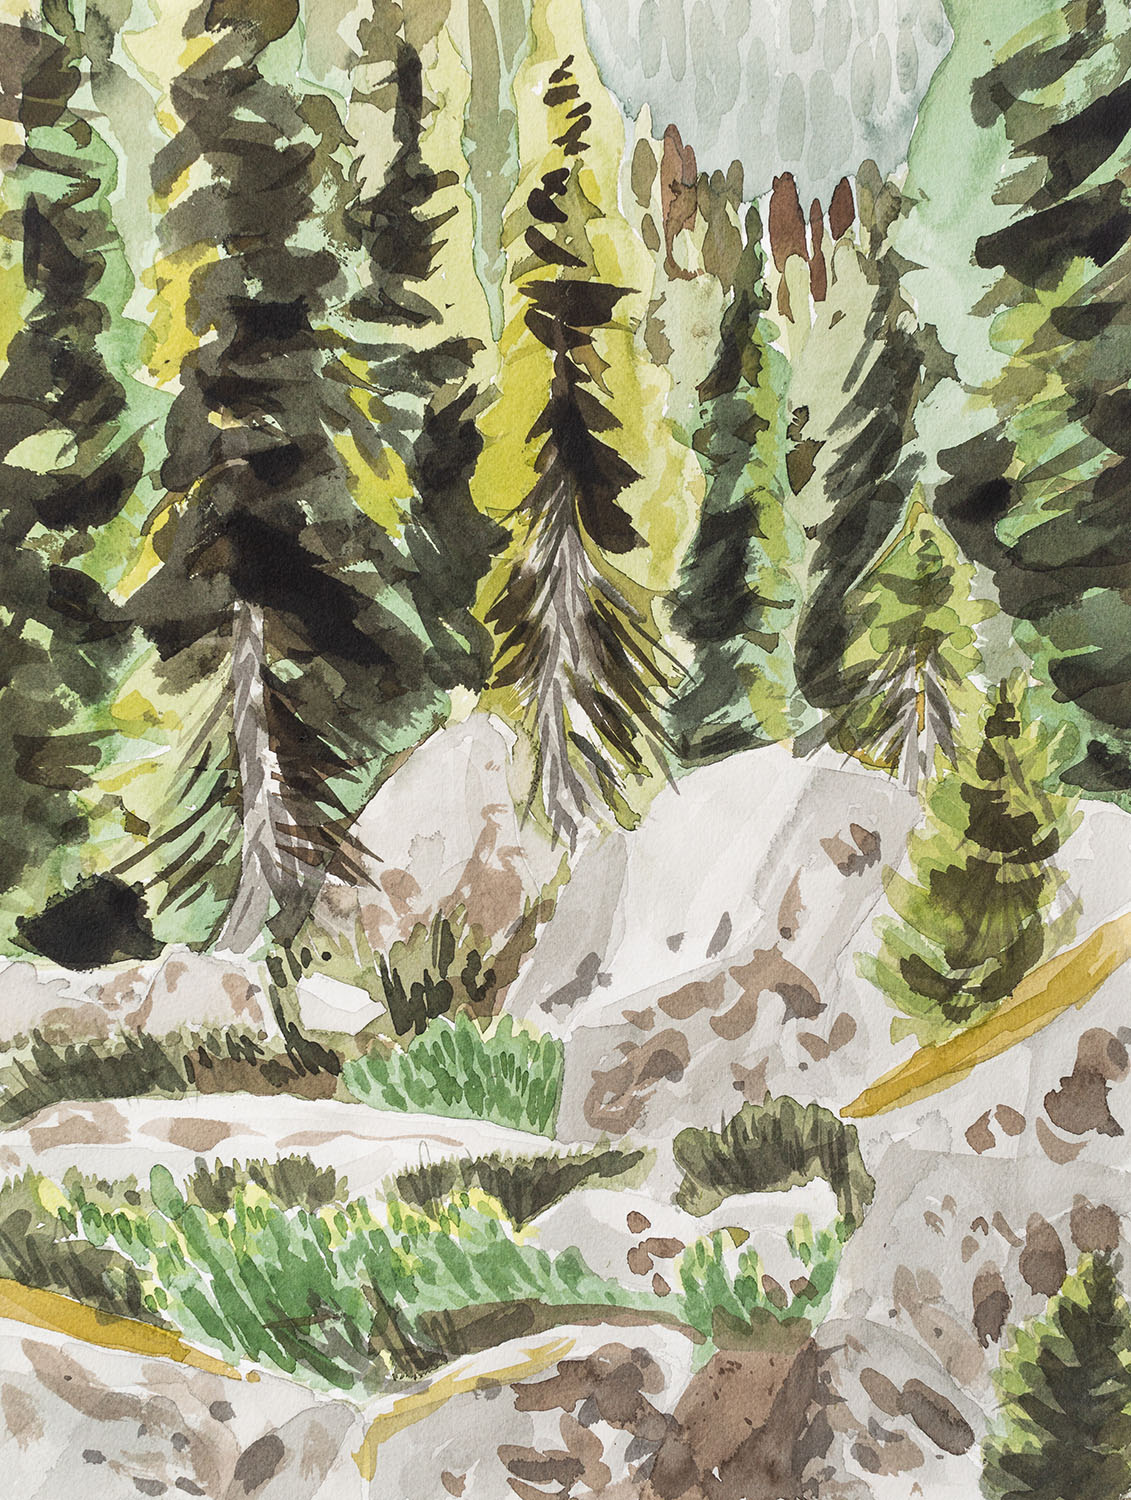 It Was a Forest of Boulders is a watercolour landscape of a forest boulder field